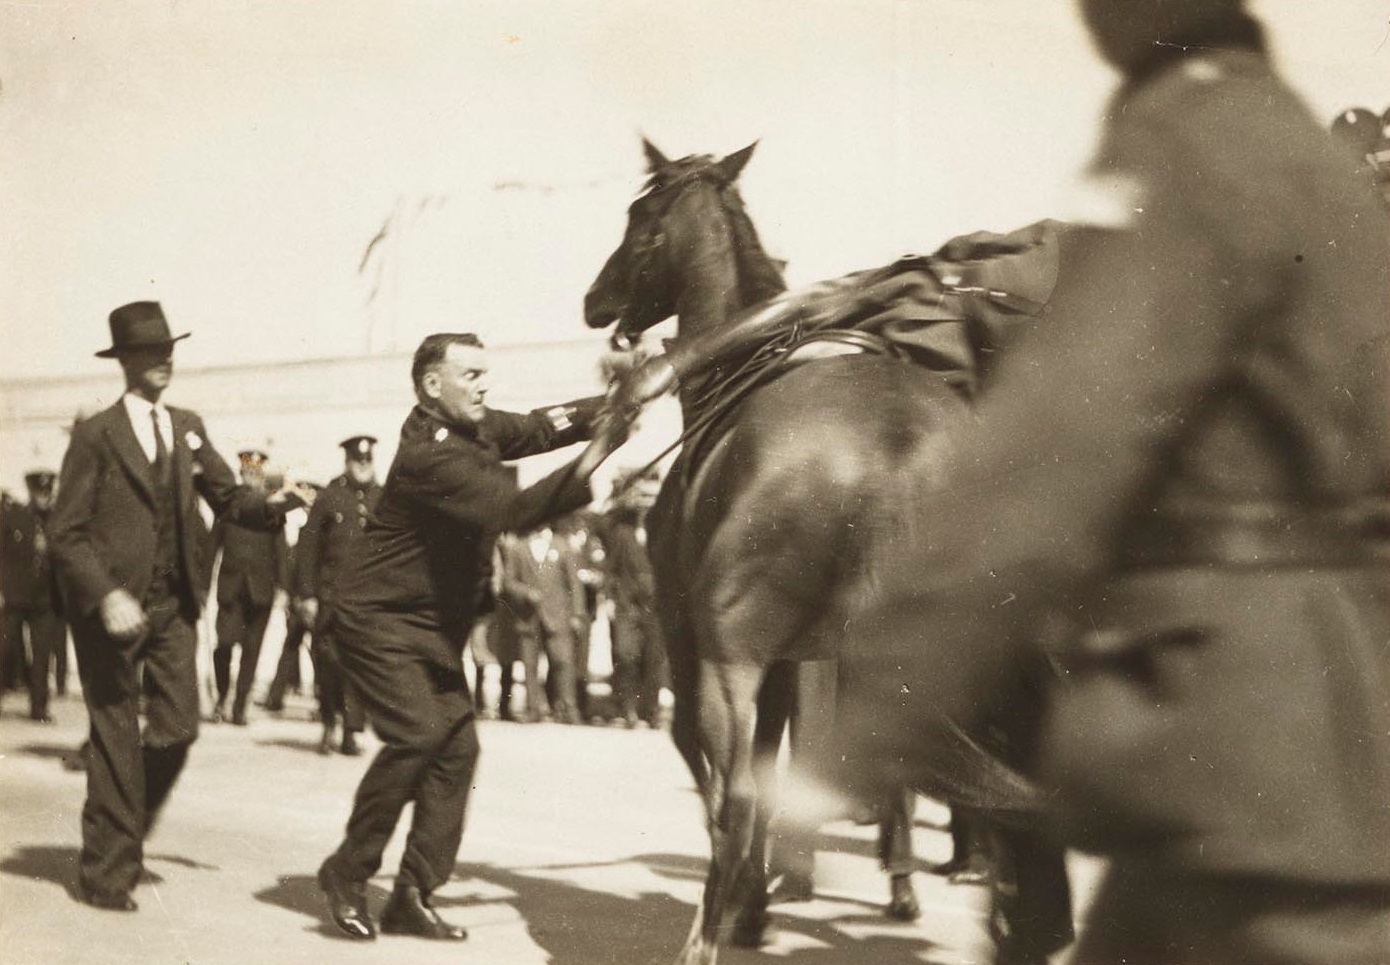 Taken as Capt. de-Groot was dragged off his horse, photograph, from Major Francis Edward De Groot - Papers: Vol. 2 - Opening of Sydney Harbour Bridge, no 10 1932, A 4946
